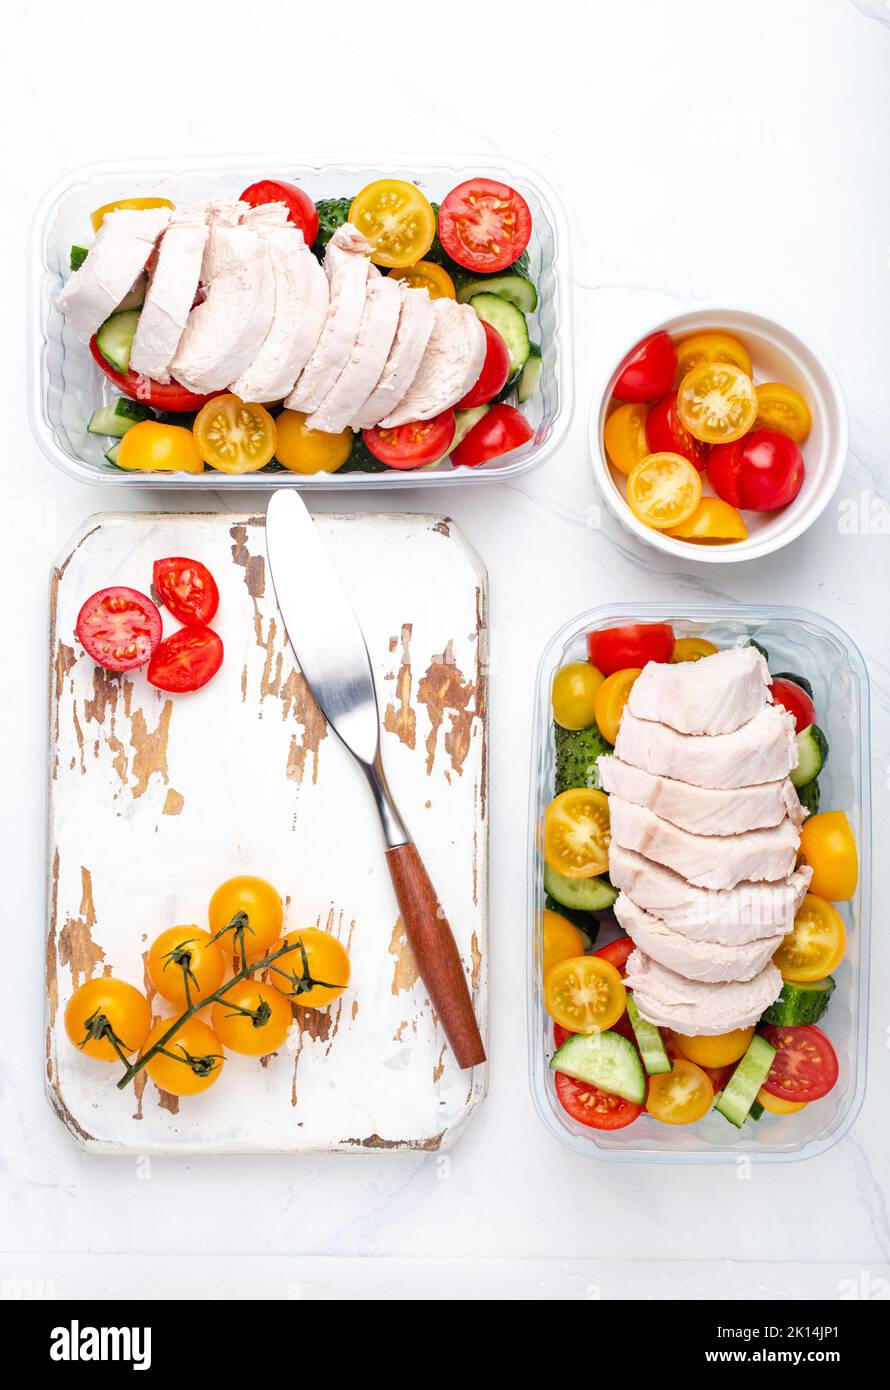 Healthy meal prep containers with fruits, berries, snacks and vegetables.  Takeaway food on white background, top view. Lunch box to school Stock  Photo - Alamy